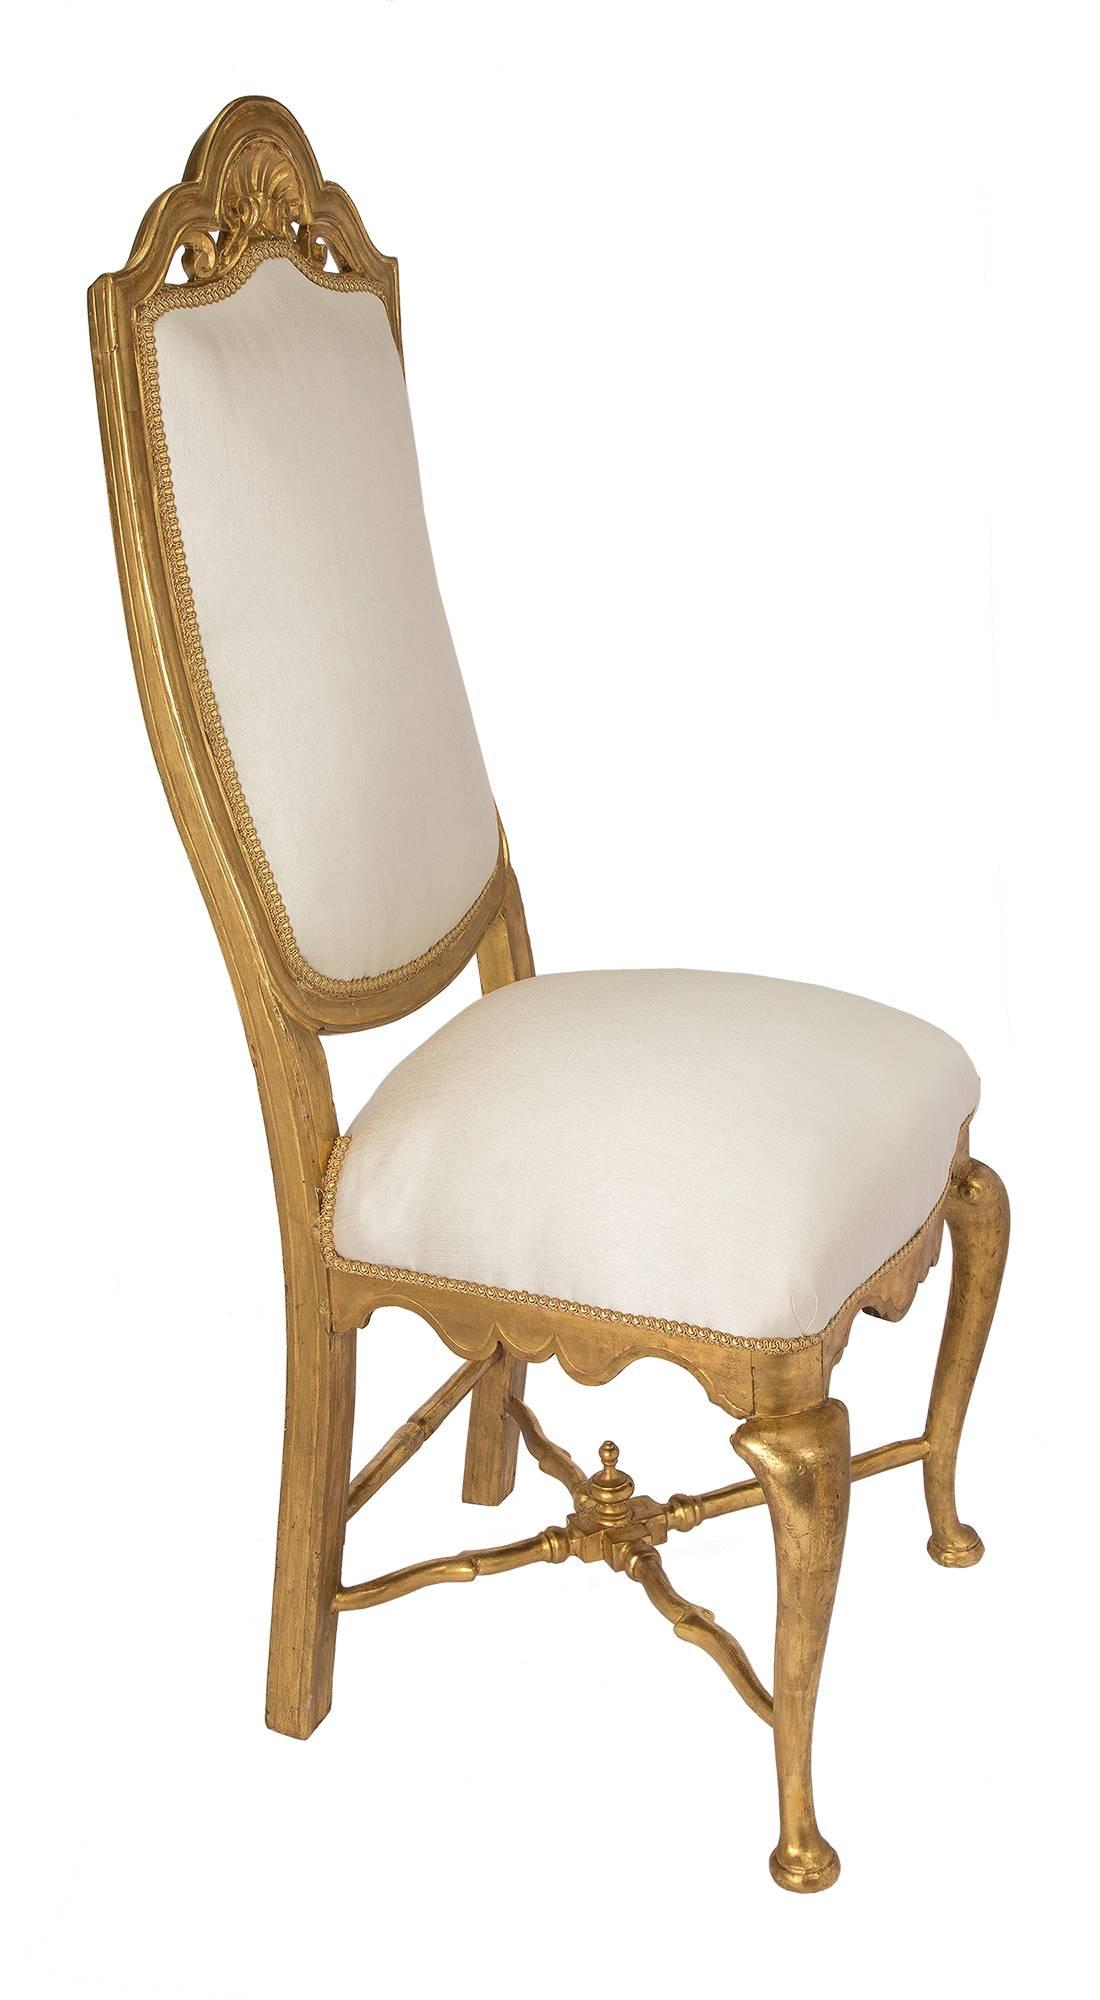 A magnificent complete set of twelve Continental 19th century Louis XV st. giltwood dining chairs. Each superb chair has straight back legs and cabriole legs at the front, all joined by an elegant  giltwood X stretcher centered by a finial. The